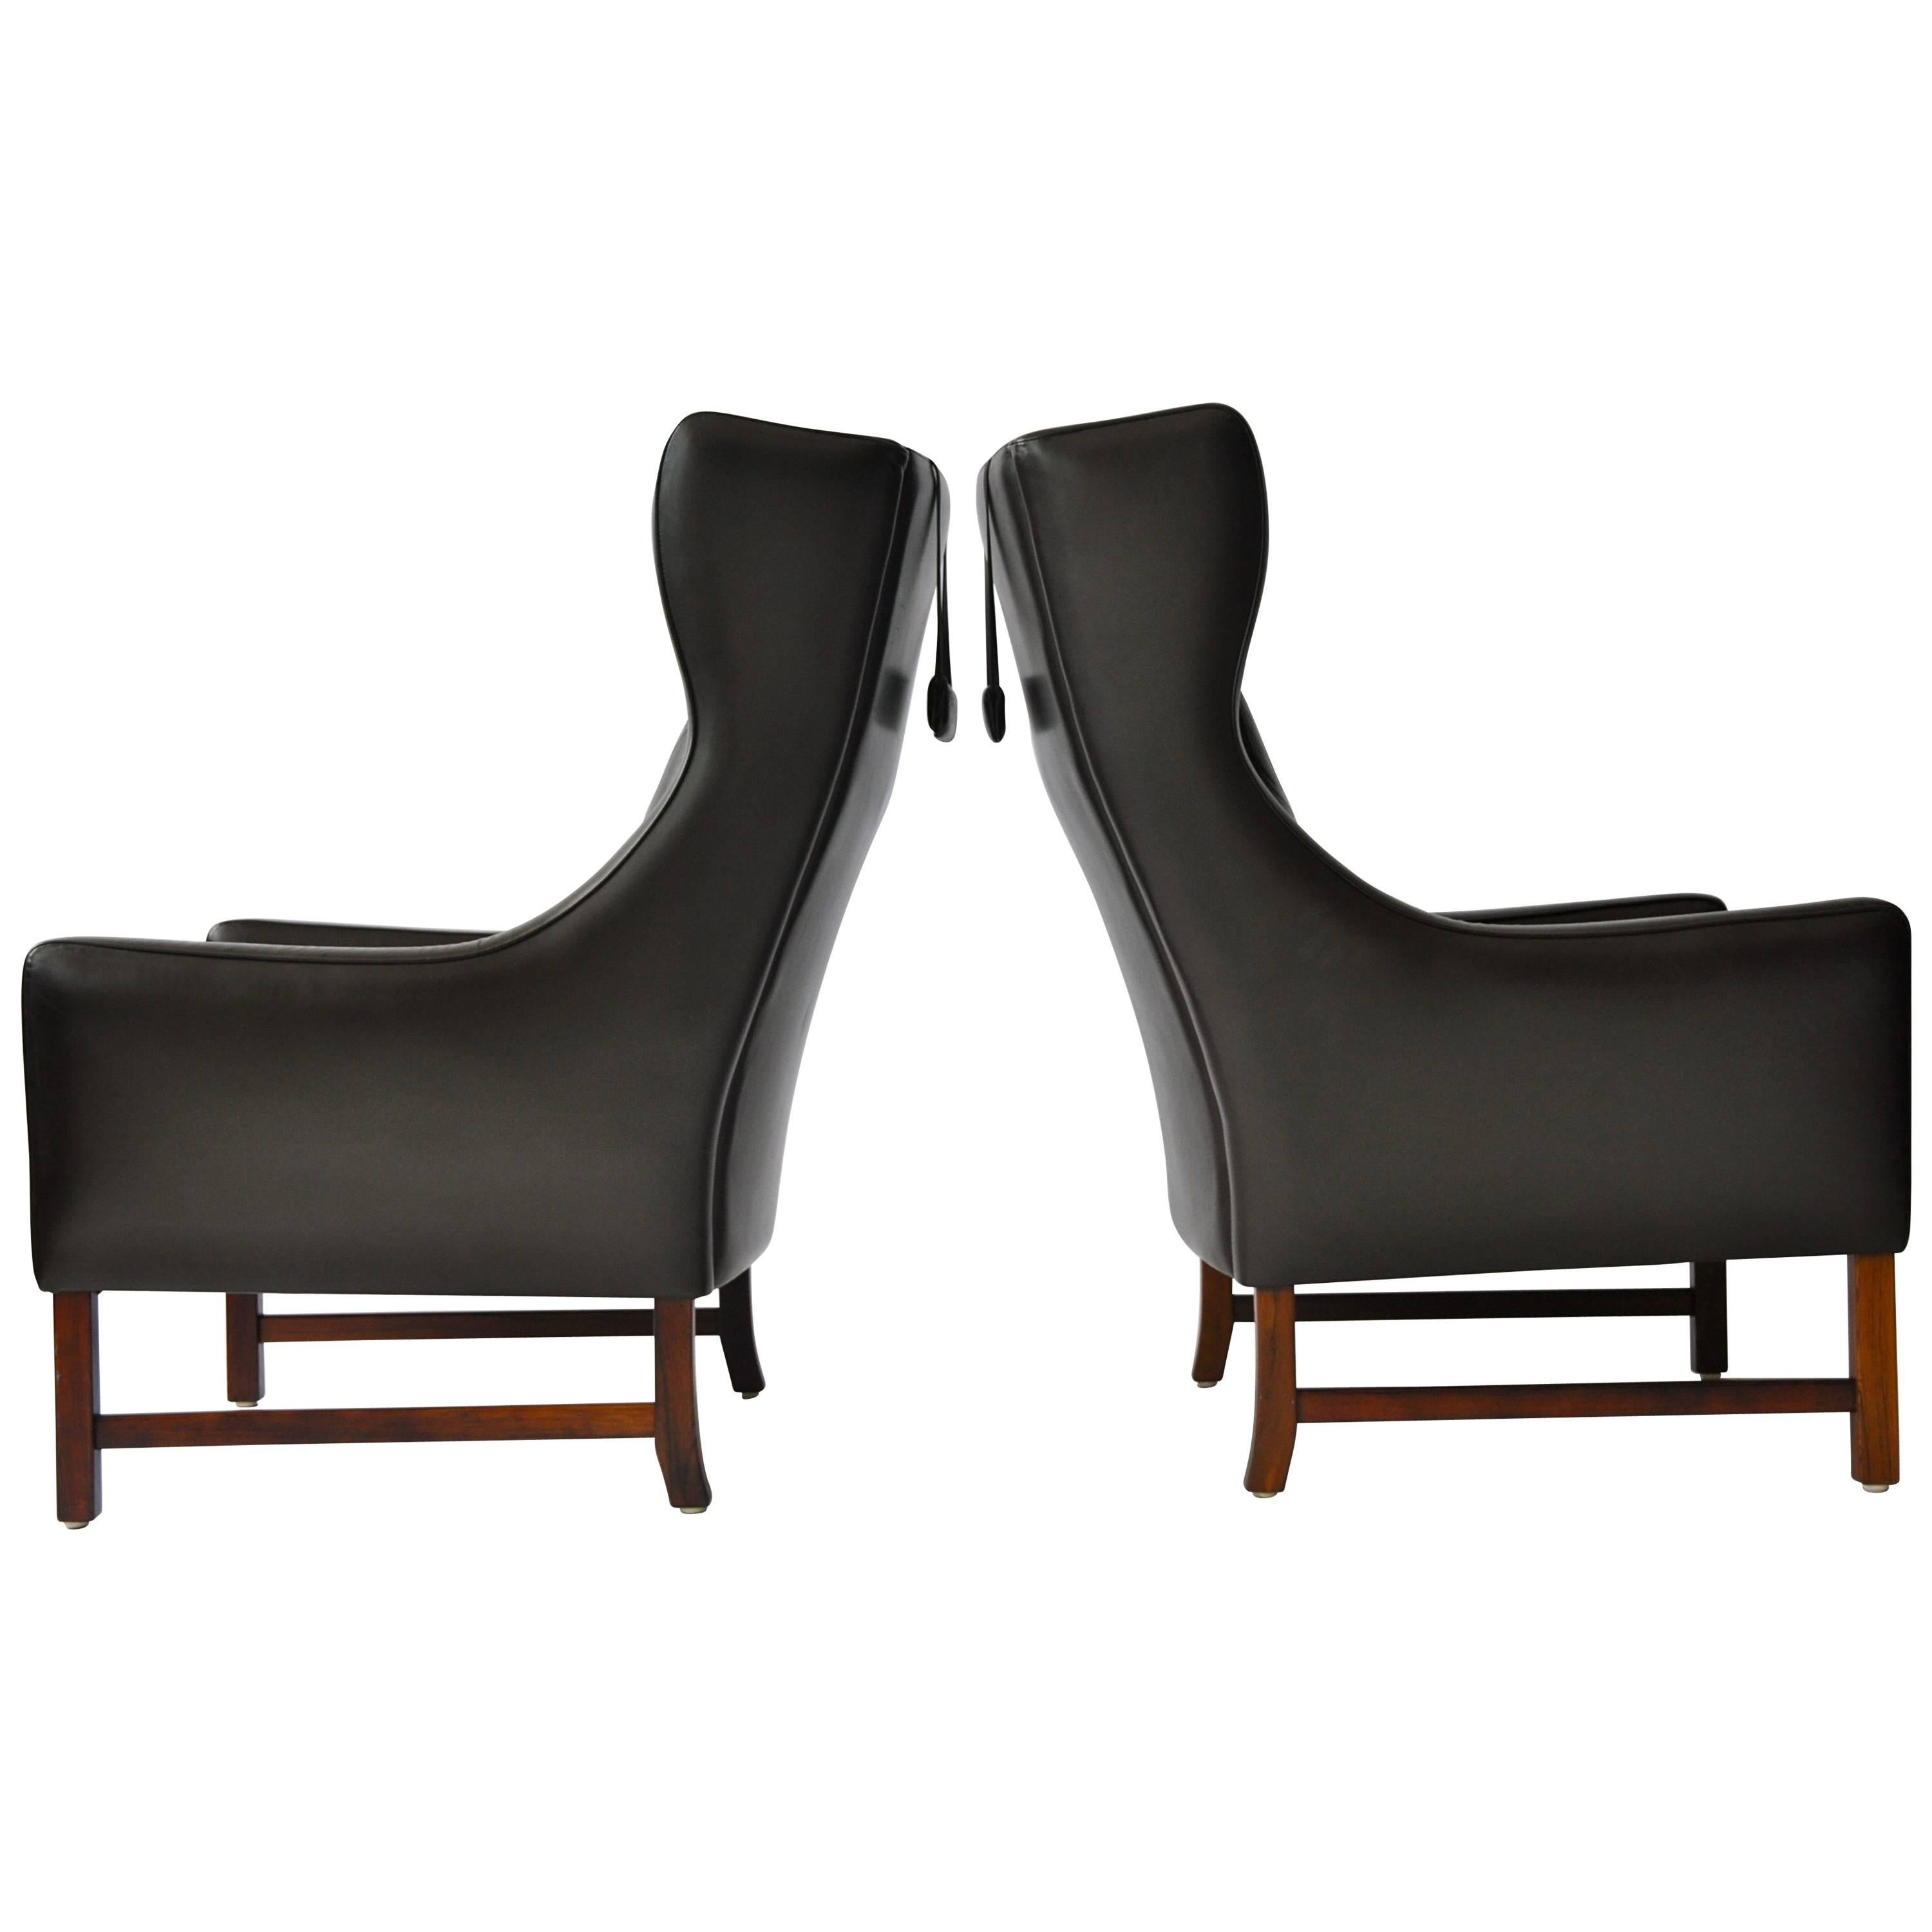 Pair of Frederik Kayser Leather Wing Chairs